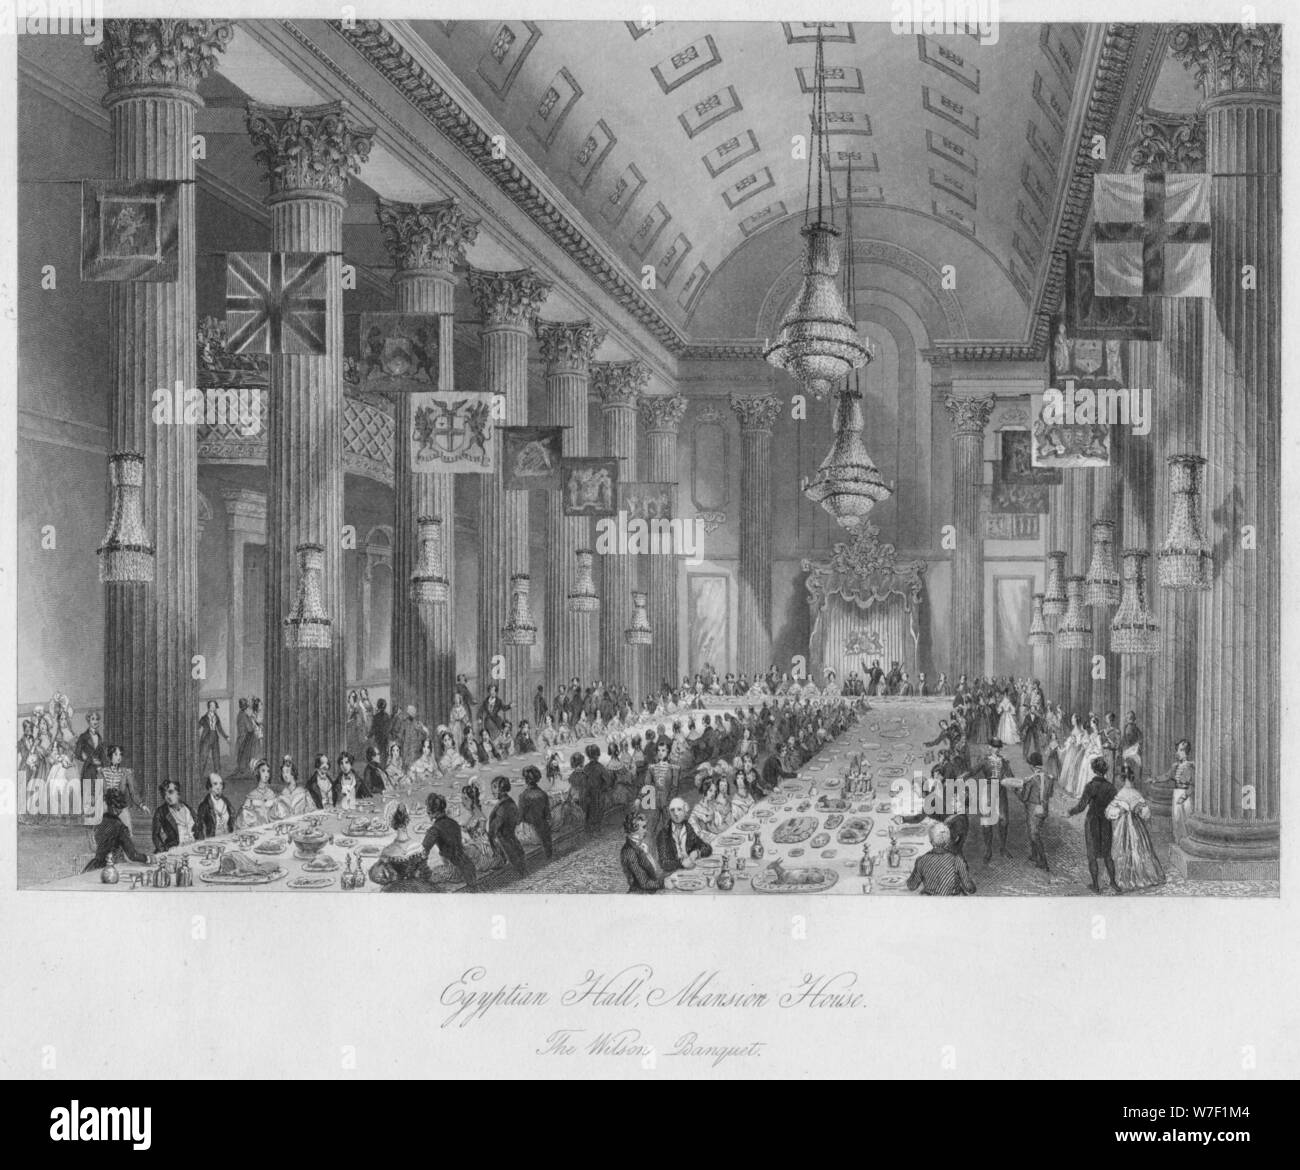 Get Mansion House Egyptian Hall Images